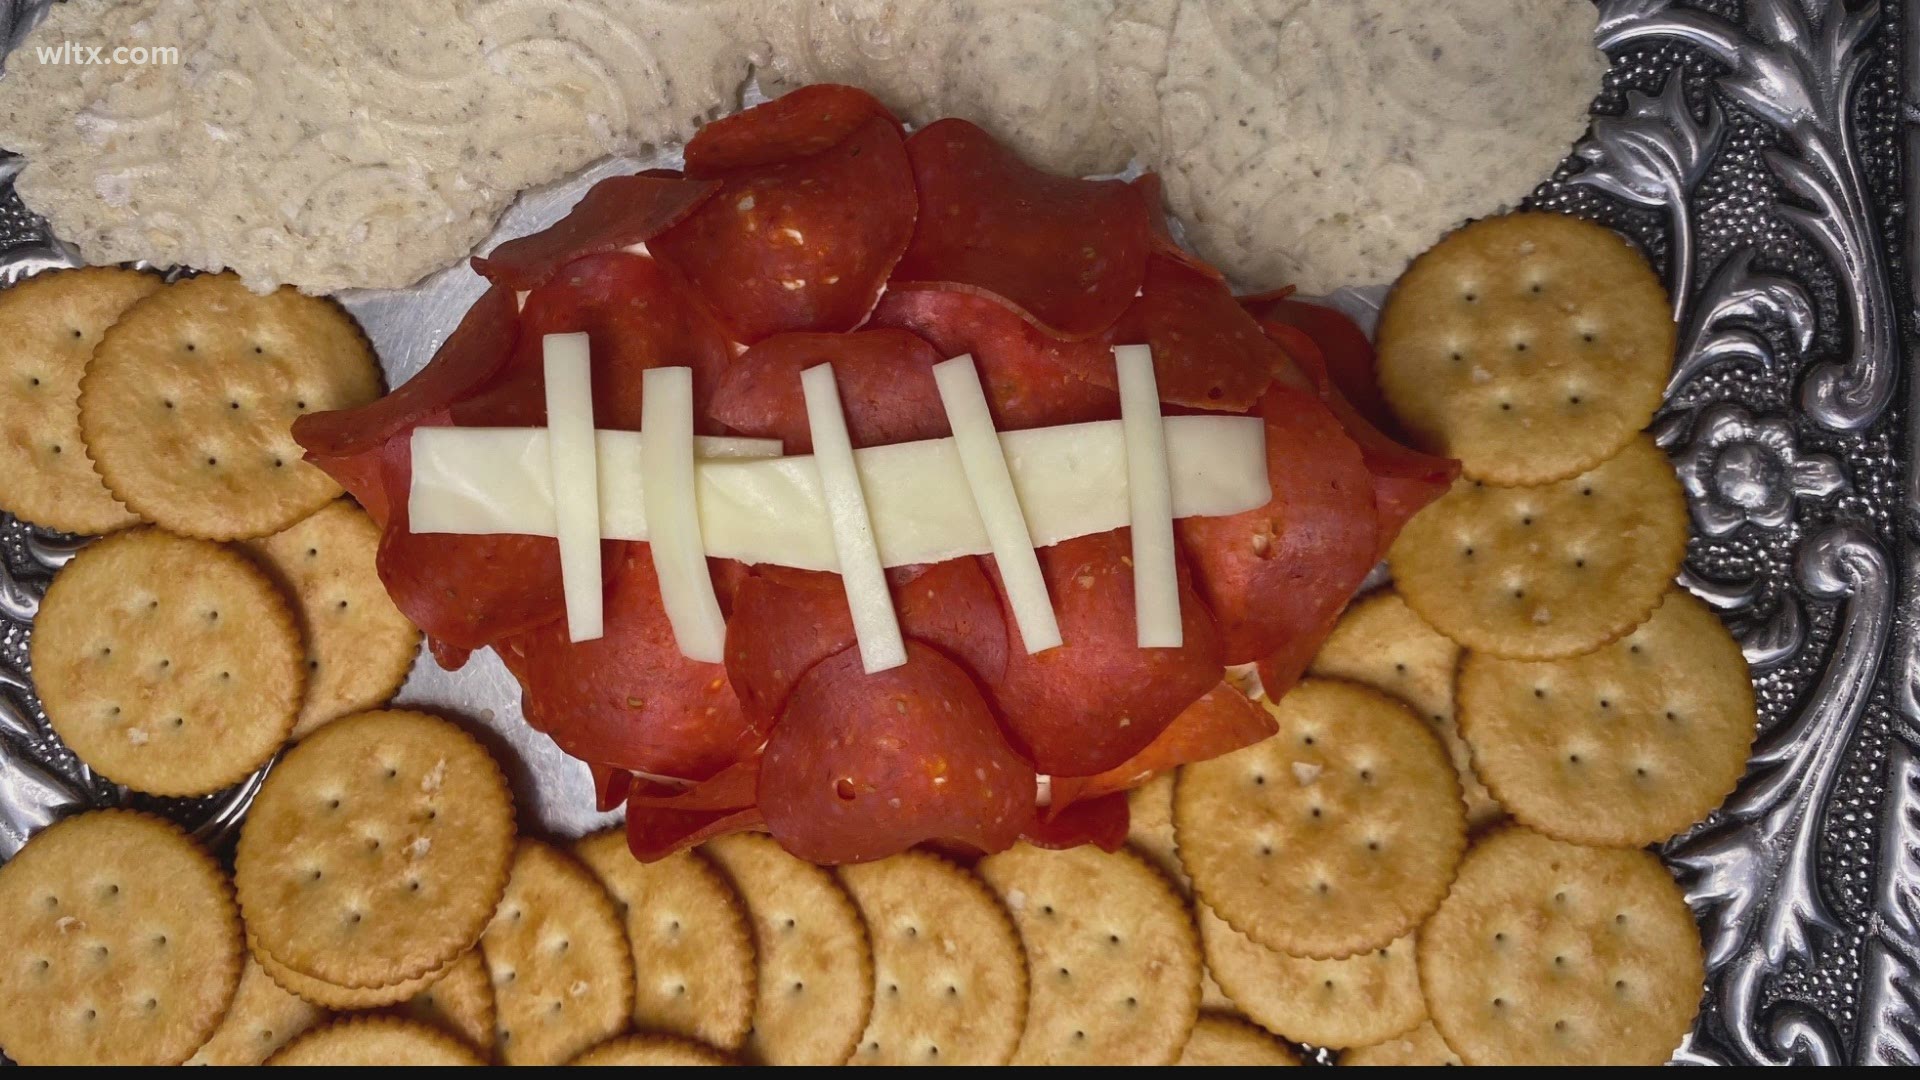 You'll 'score' at the Big Game with this tasty treat.